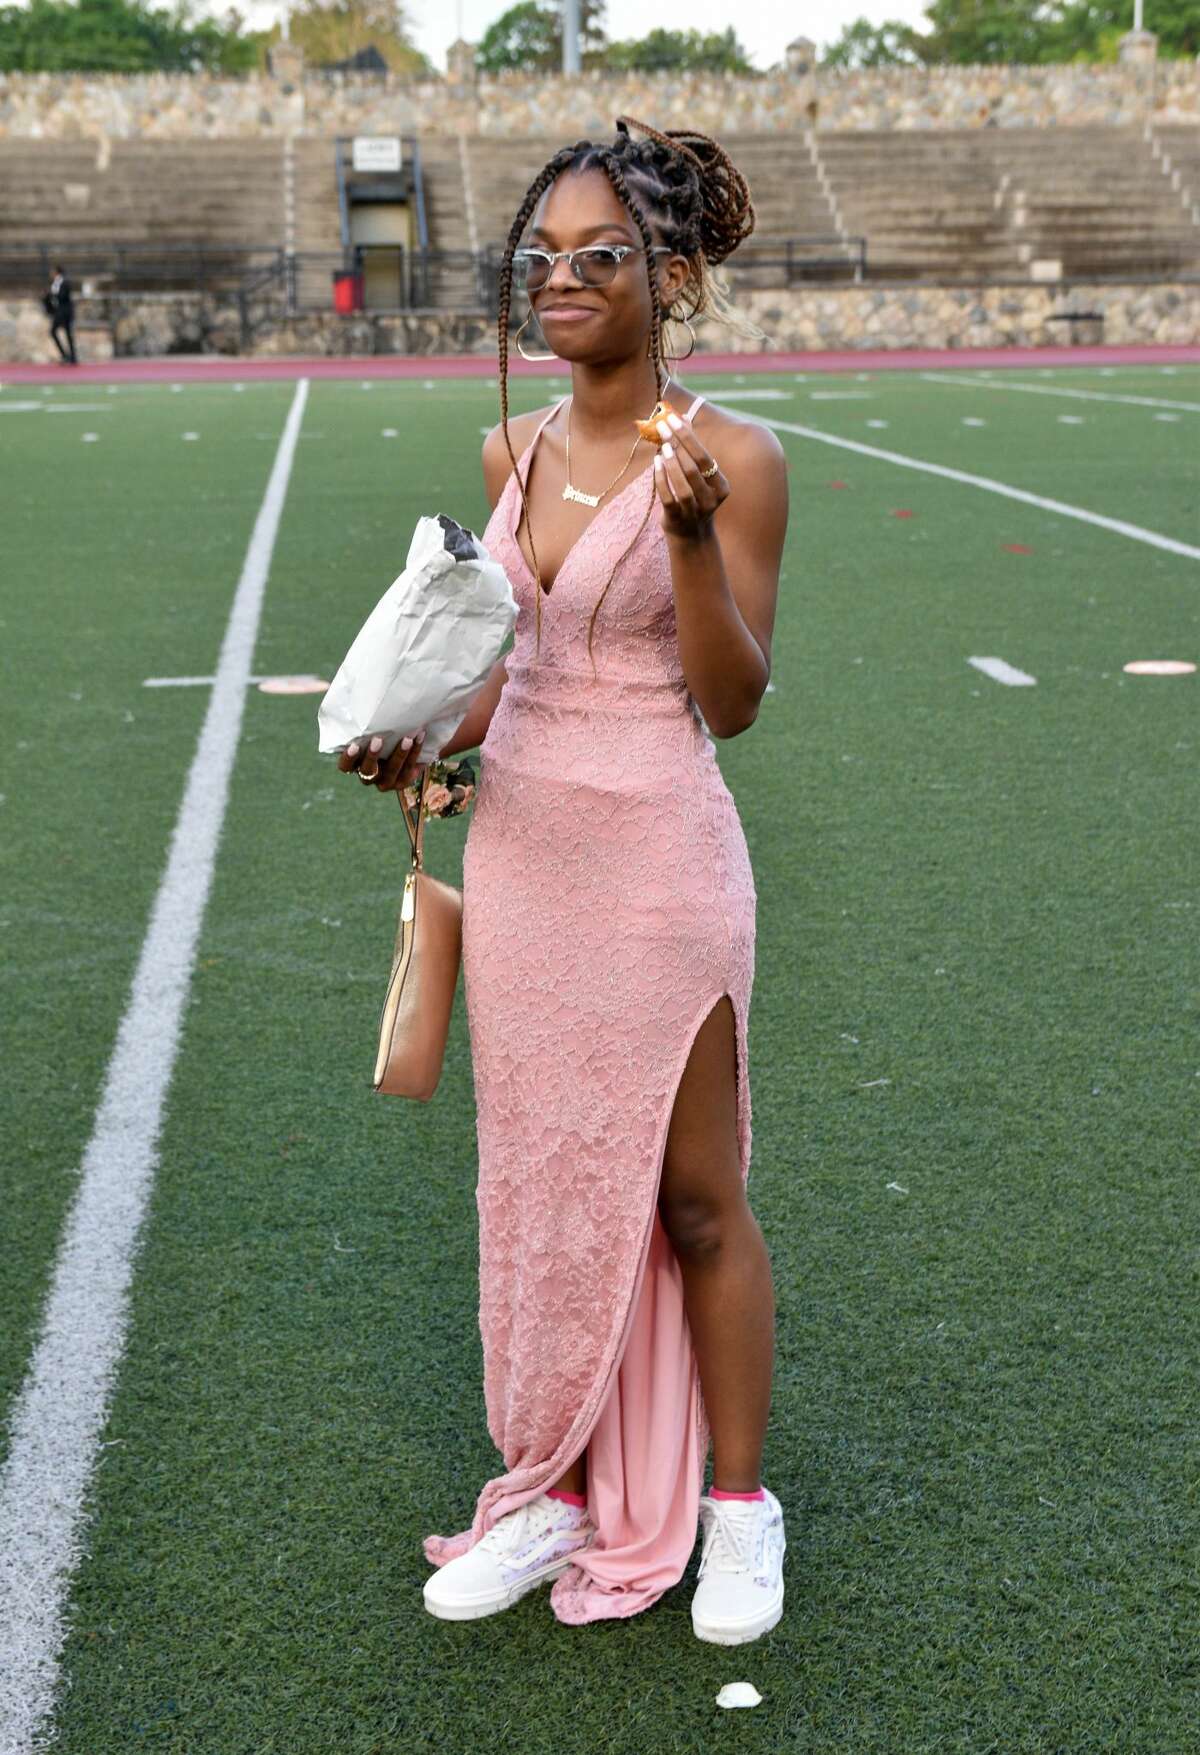 Stamford High School held its prom on June 4, 2021 at Boyle Stadium. Were you SEEN?